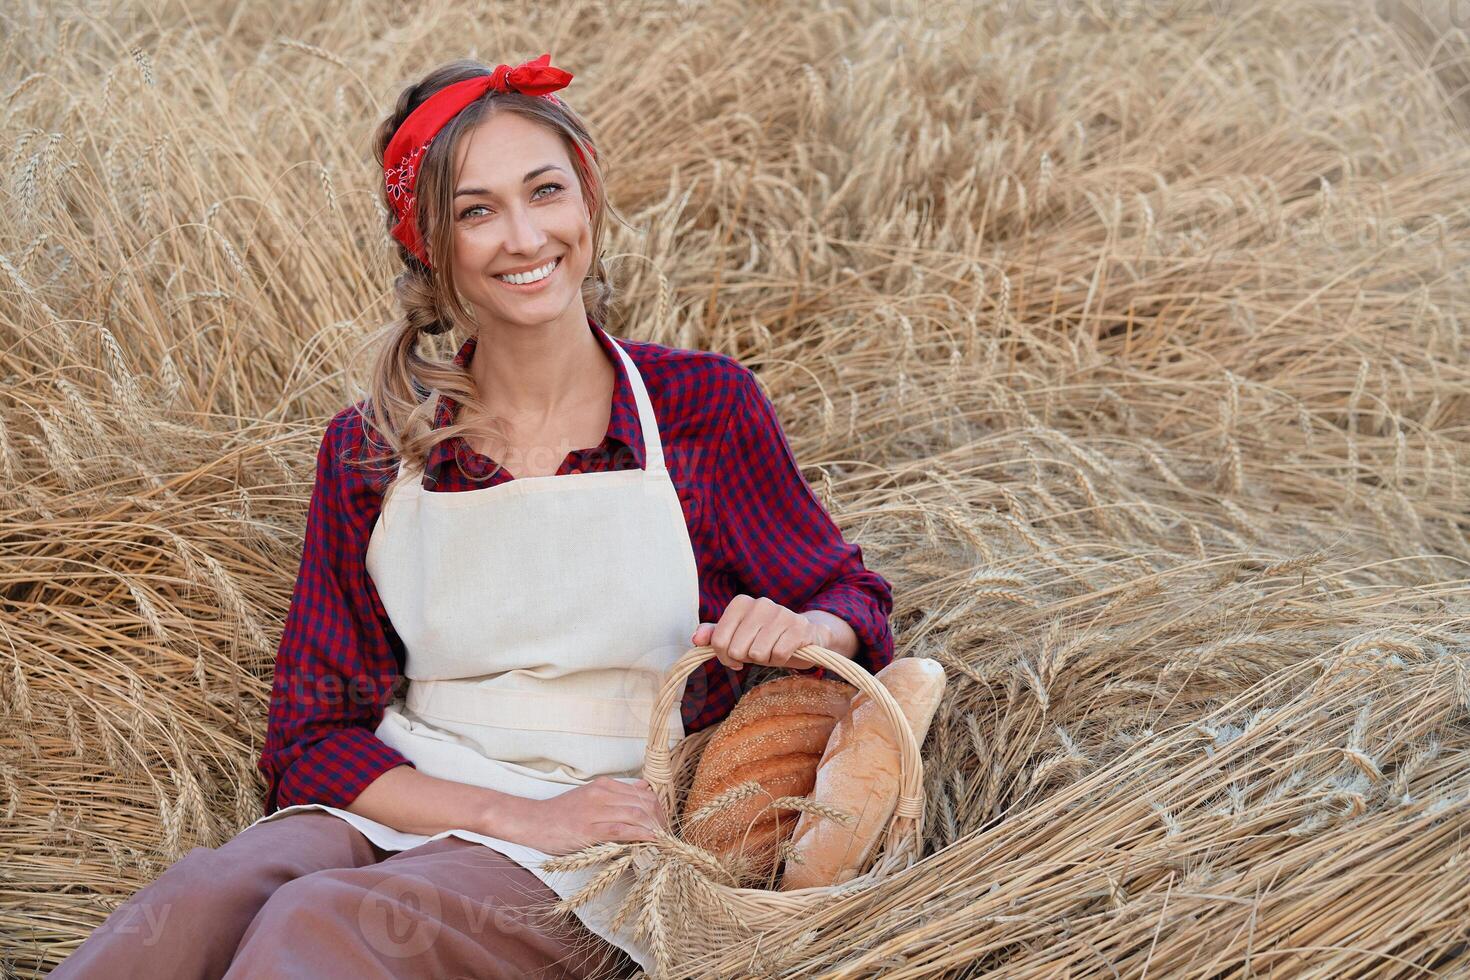 Female farmer sitting wheat agricultural field Woman baker holding wicker basket bread product photo